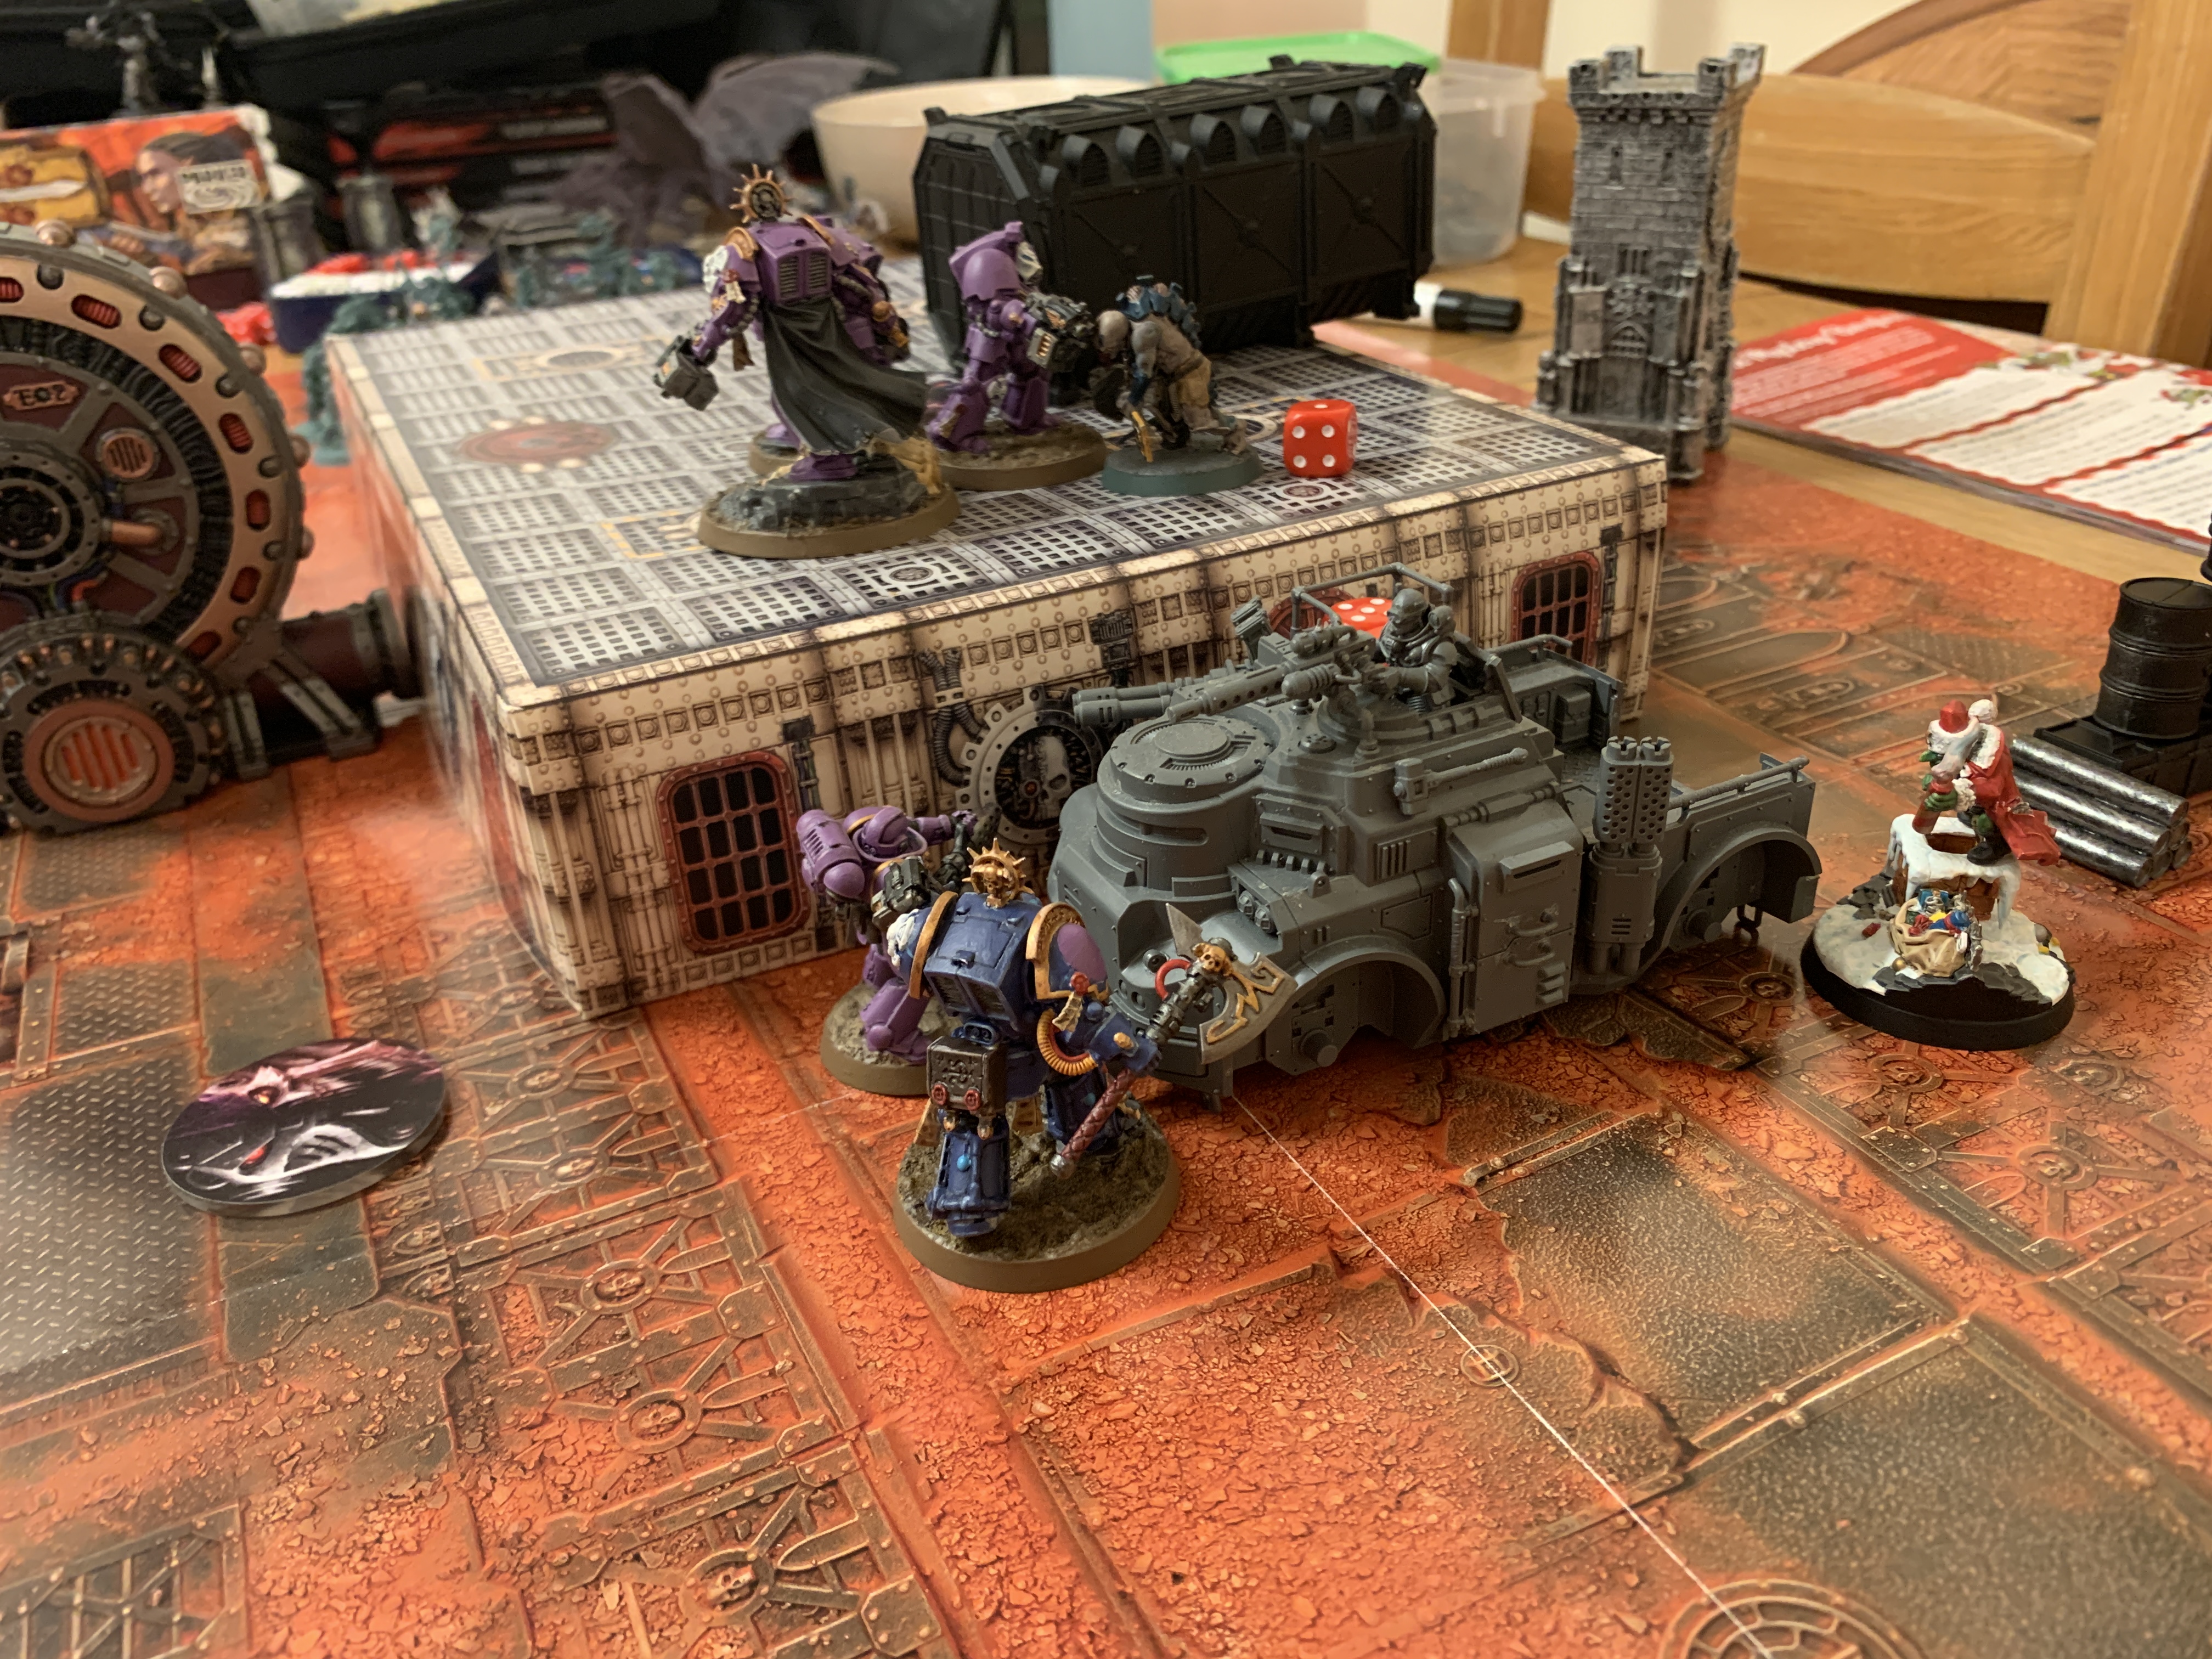 A battle scene split into two levels by a boxy bit of terrain. On top of the terrain are three purple Space Marines in Terminator Armour fighting a Genestealer Aberrant with a red dice next to it showing one. On the lower level is a unpainted truck with a purple Infernus Marine, a dark blue Librarian in Terminator Amour and a Ork in a Santa costume on a snowy base 